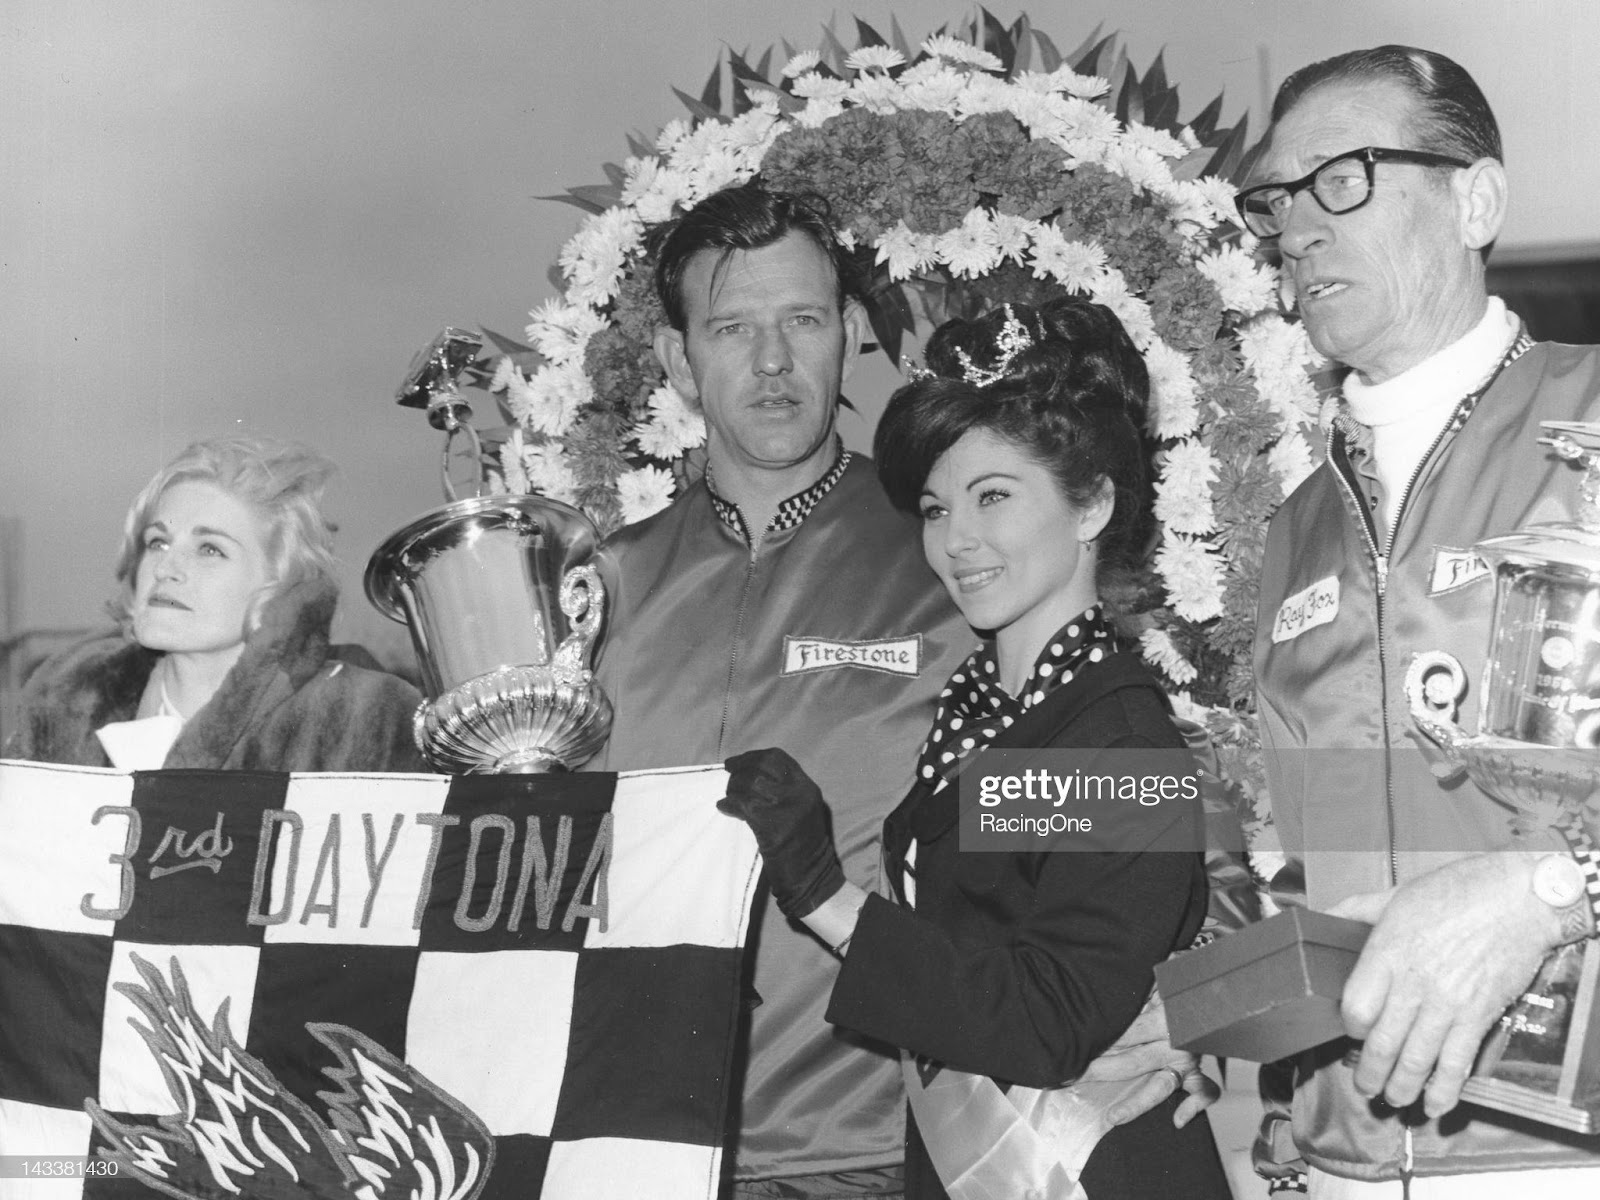 D:\Documenti\posts\posts\Women and motorsport\foto\Getty e altre\february-24-1968-bunkie-blackburn-is-surrounded-by-race-queens-in-picture-id143381430.jpg